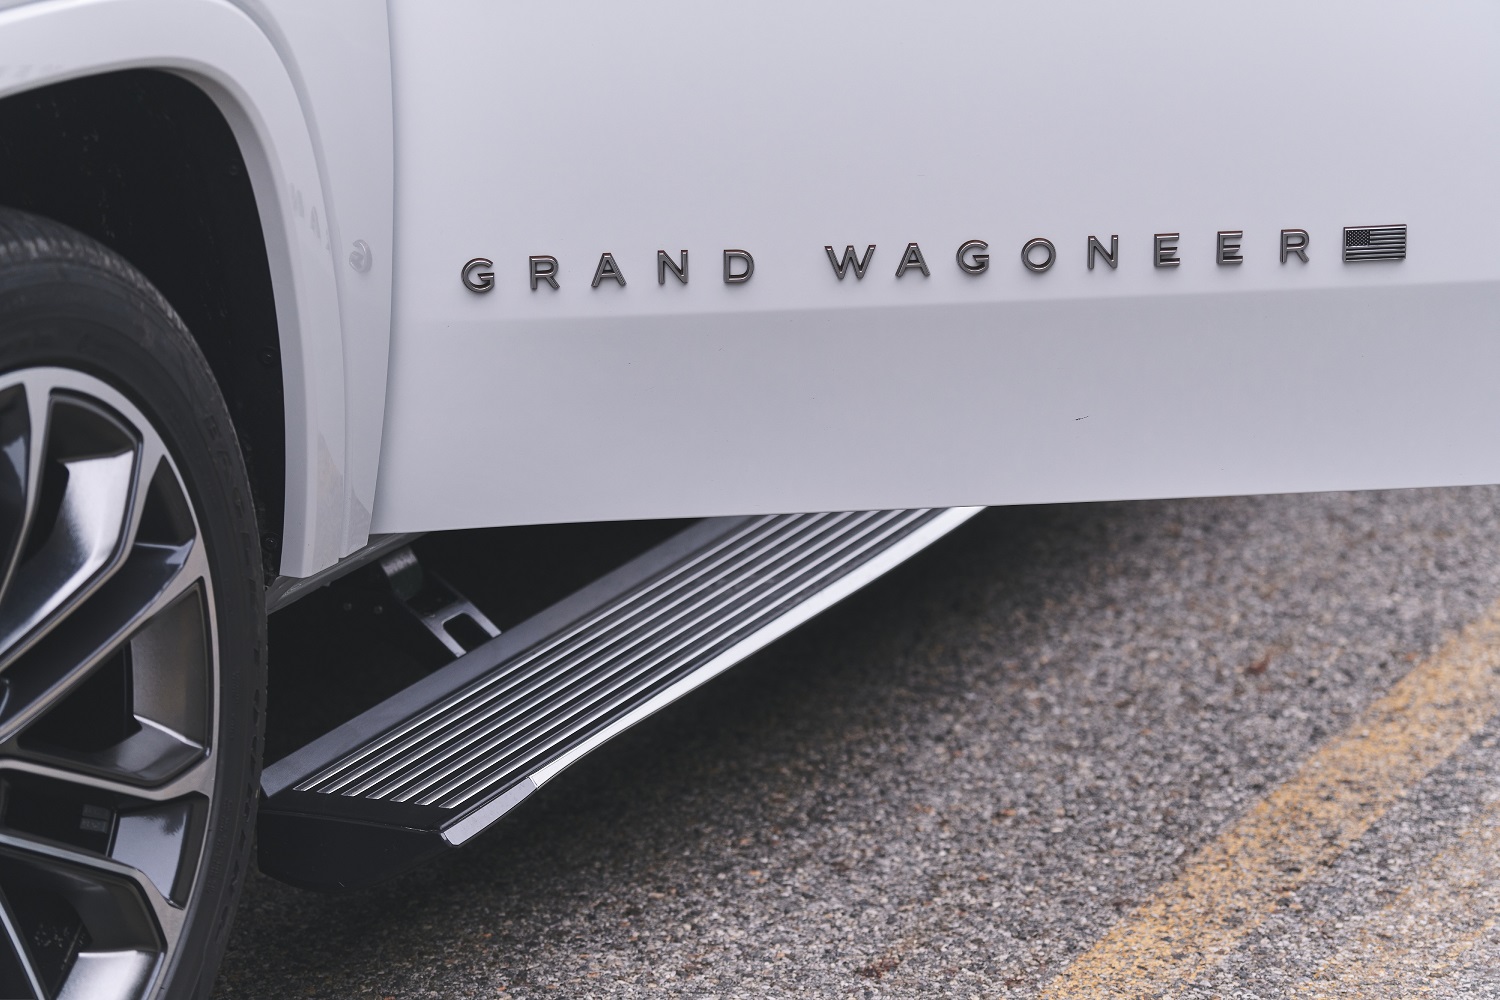 Power running boards lower to a convenient step-aboard height.